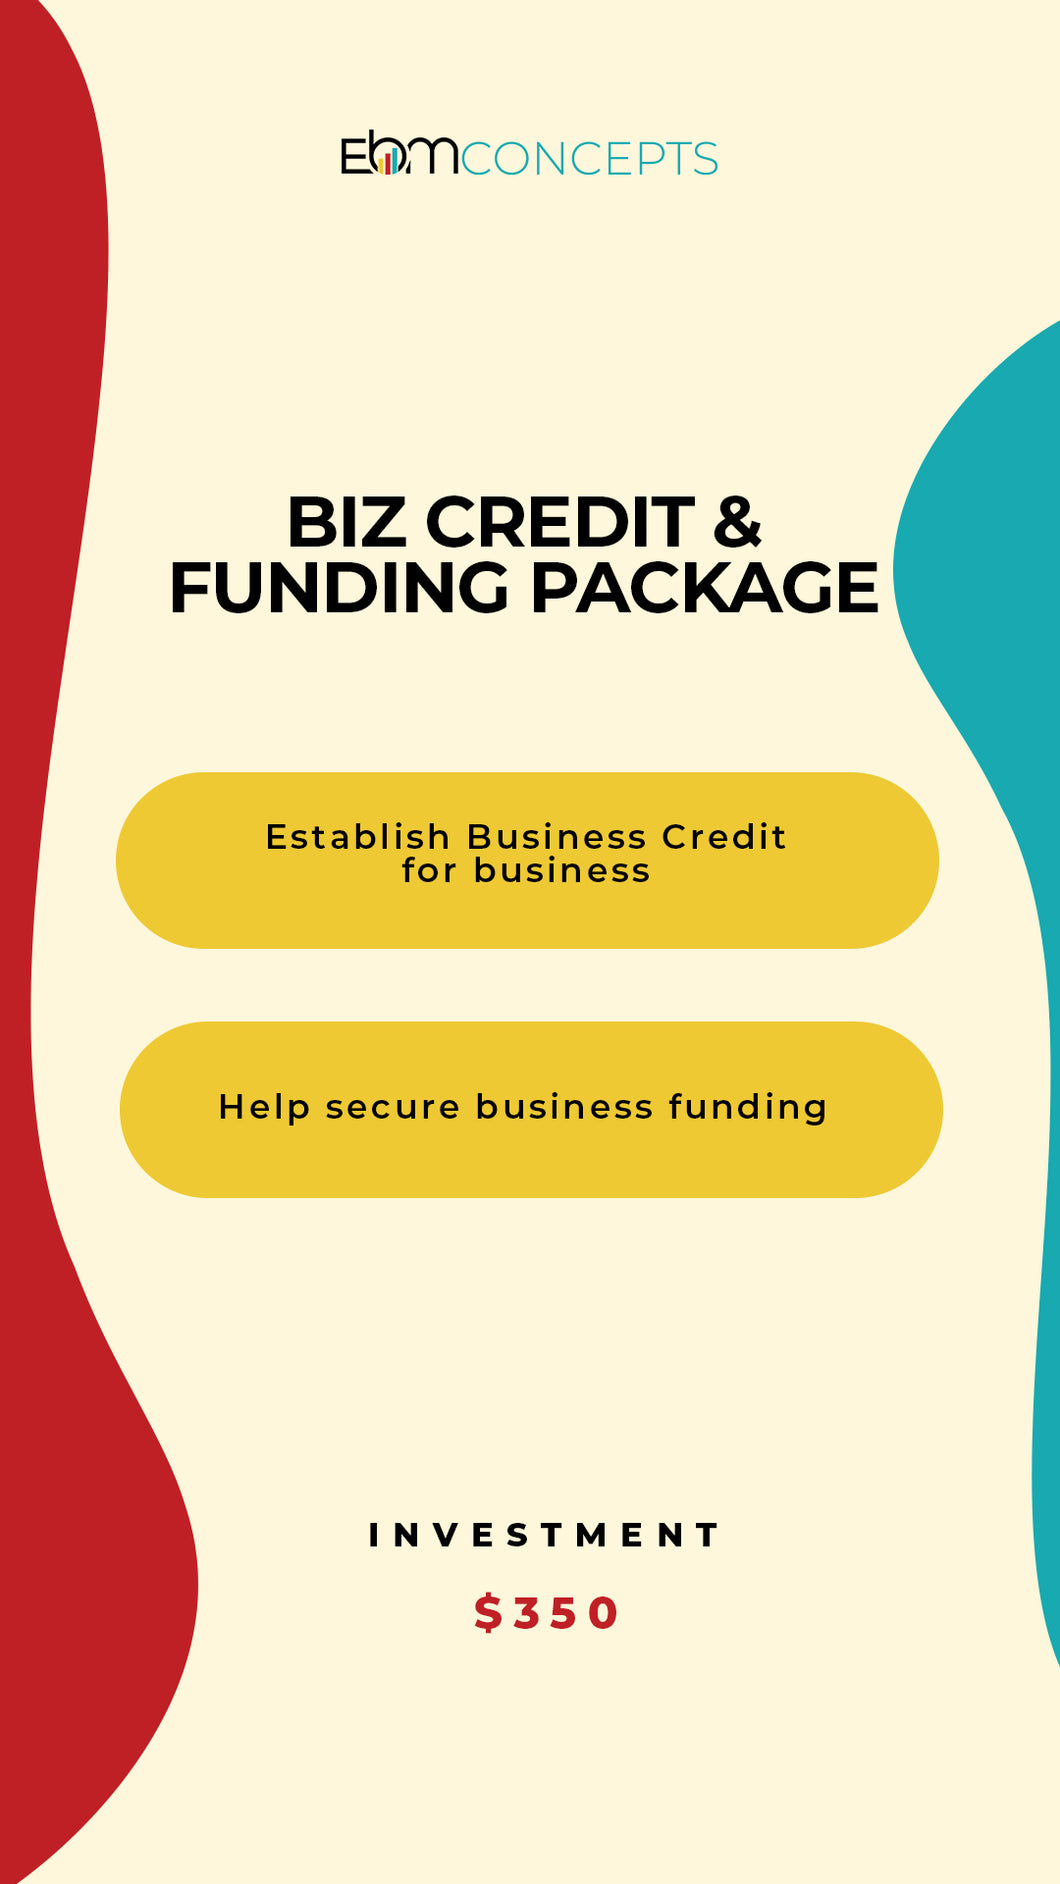 Business Credit and Funding Package